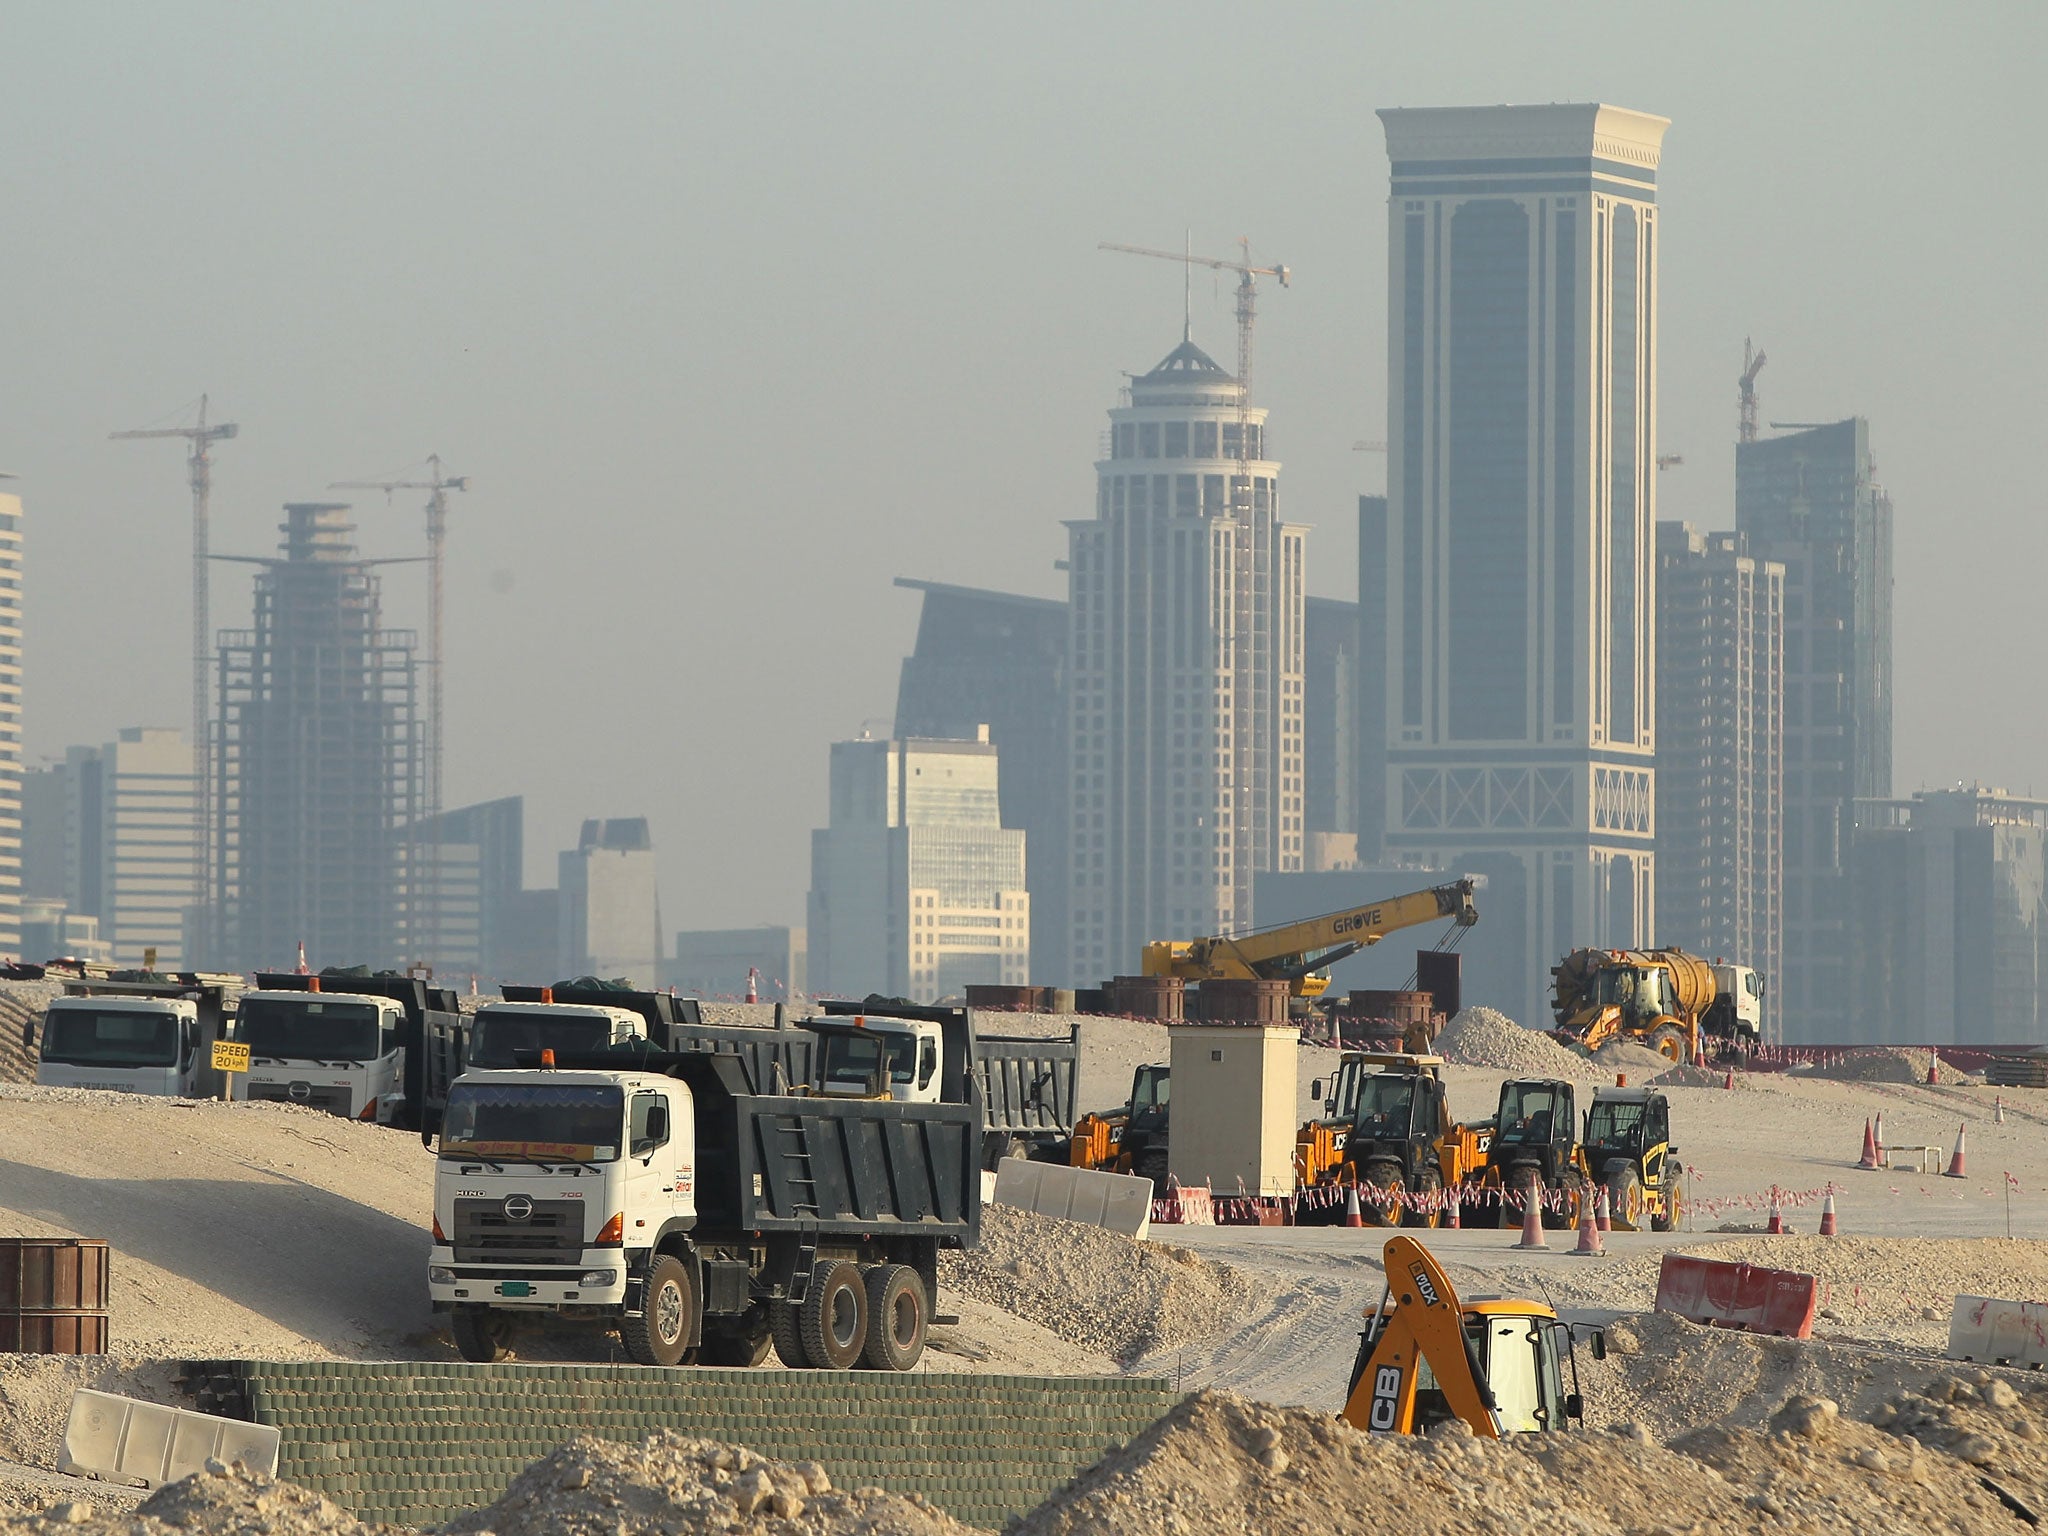 North Korean construction workers are understood to be sent to Qatar to work effectively as 'slaves' for their regime